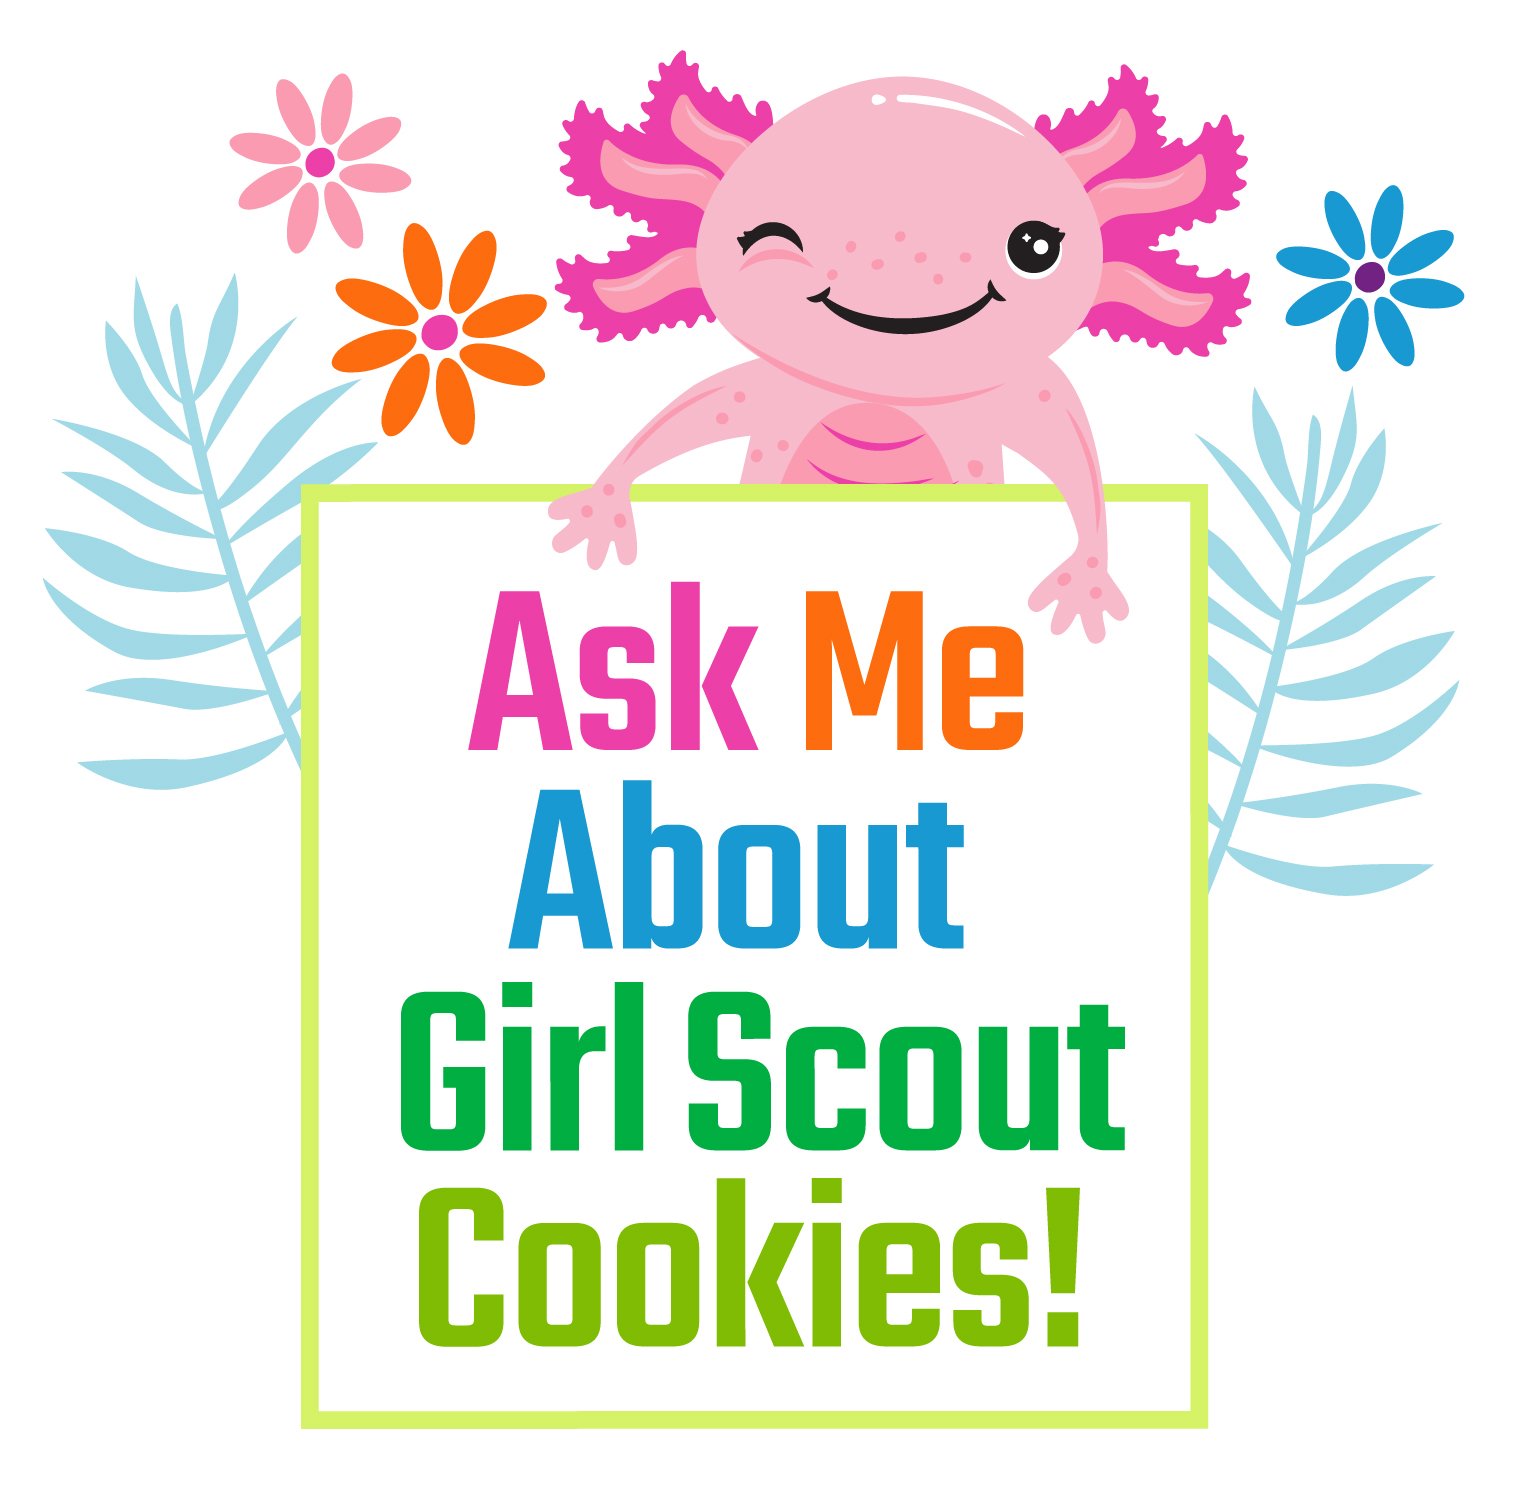 Small pink axolotl, colorful flower icons, and a text box that says "Ask me about Girl Scout Cookies"